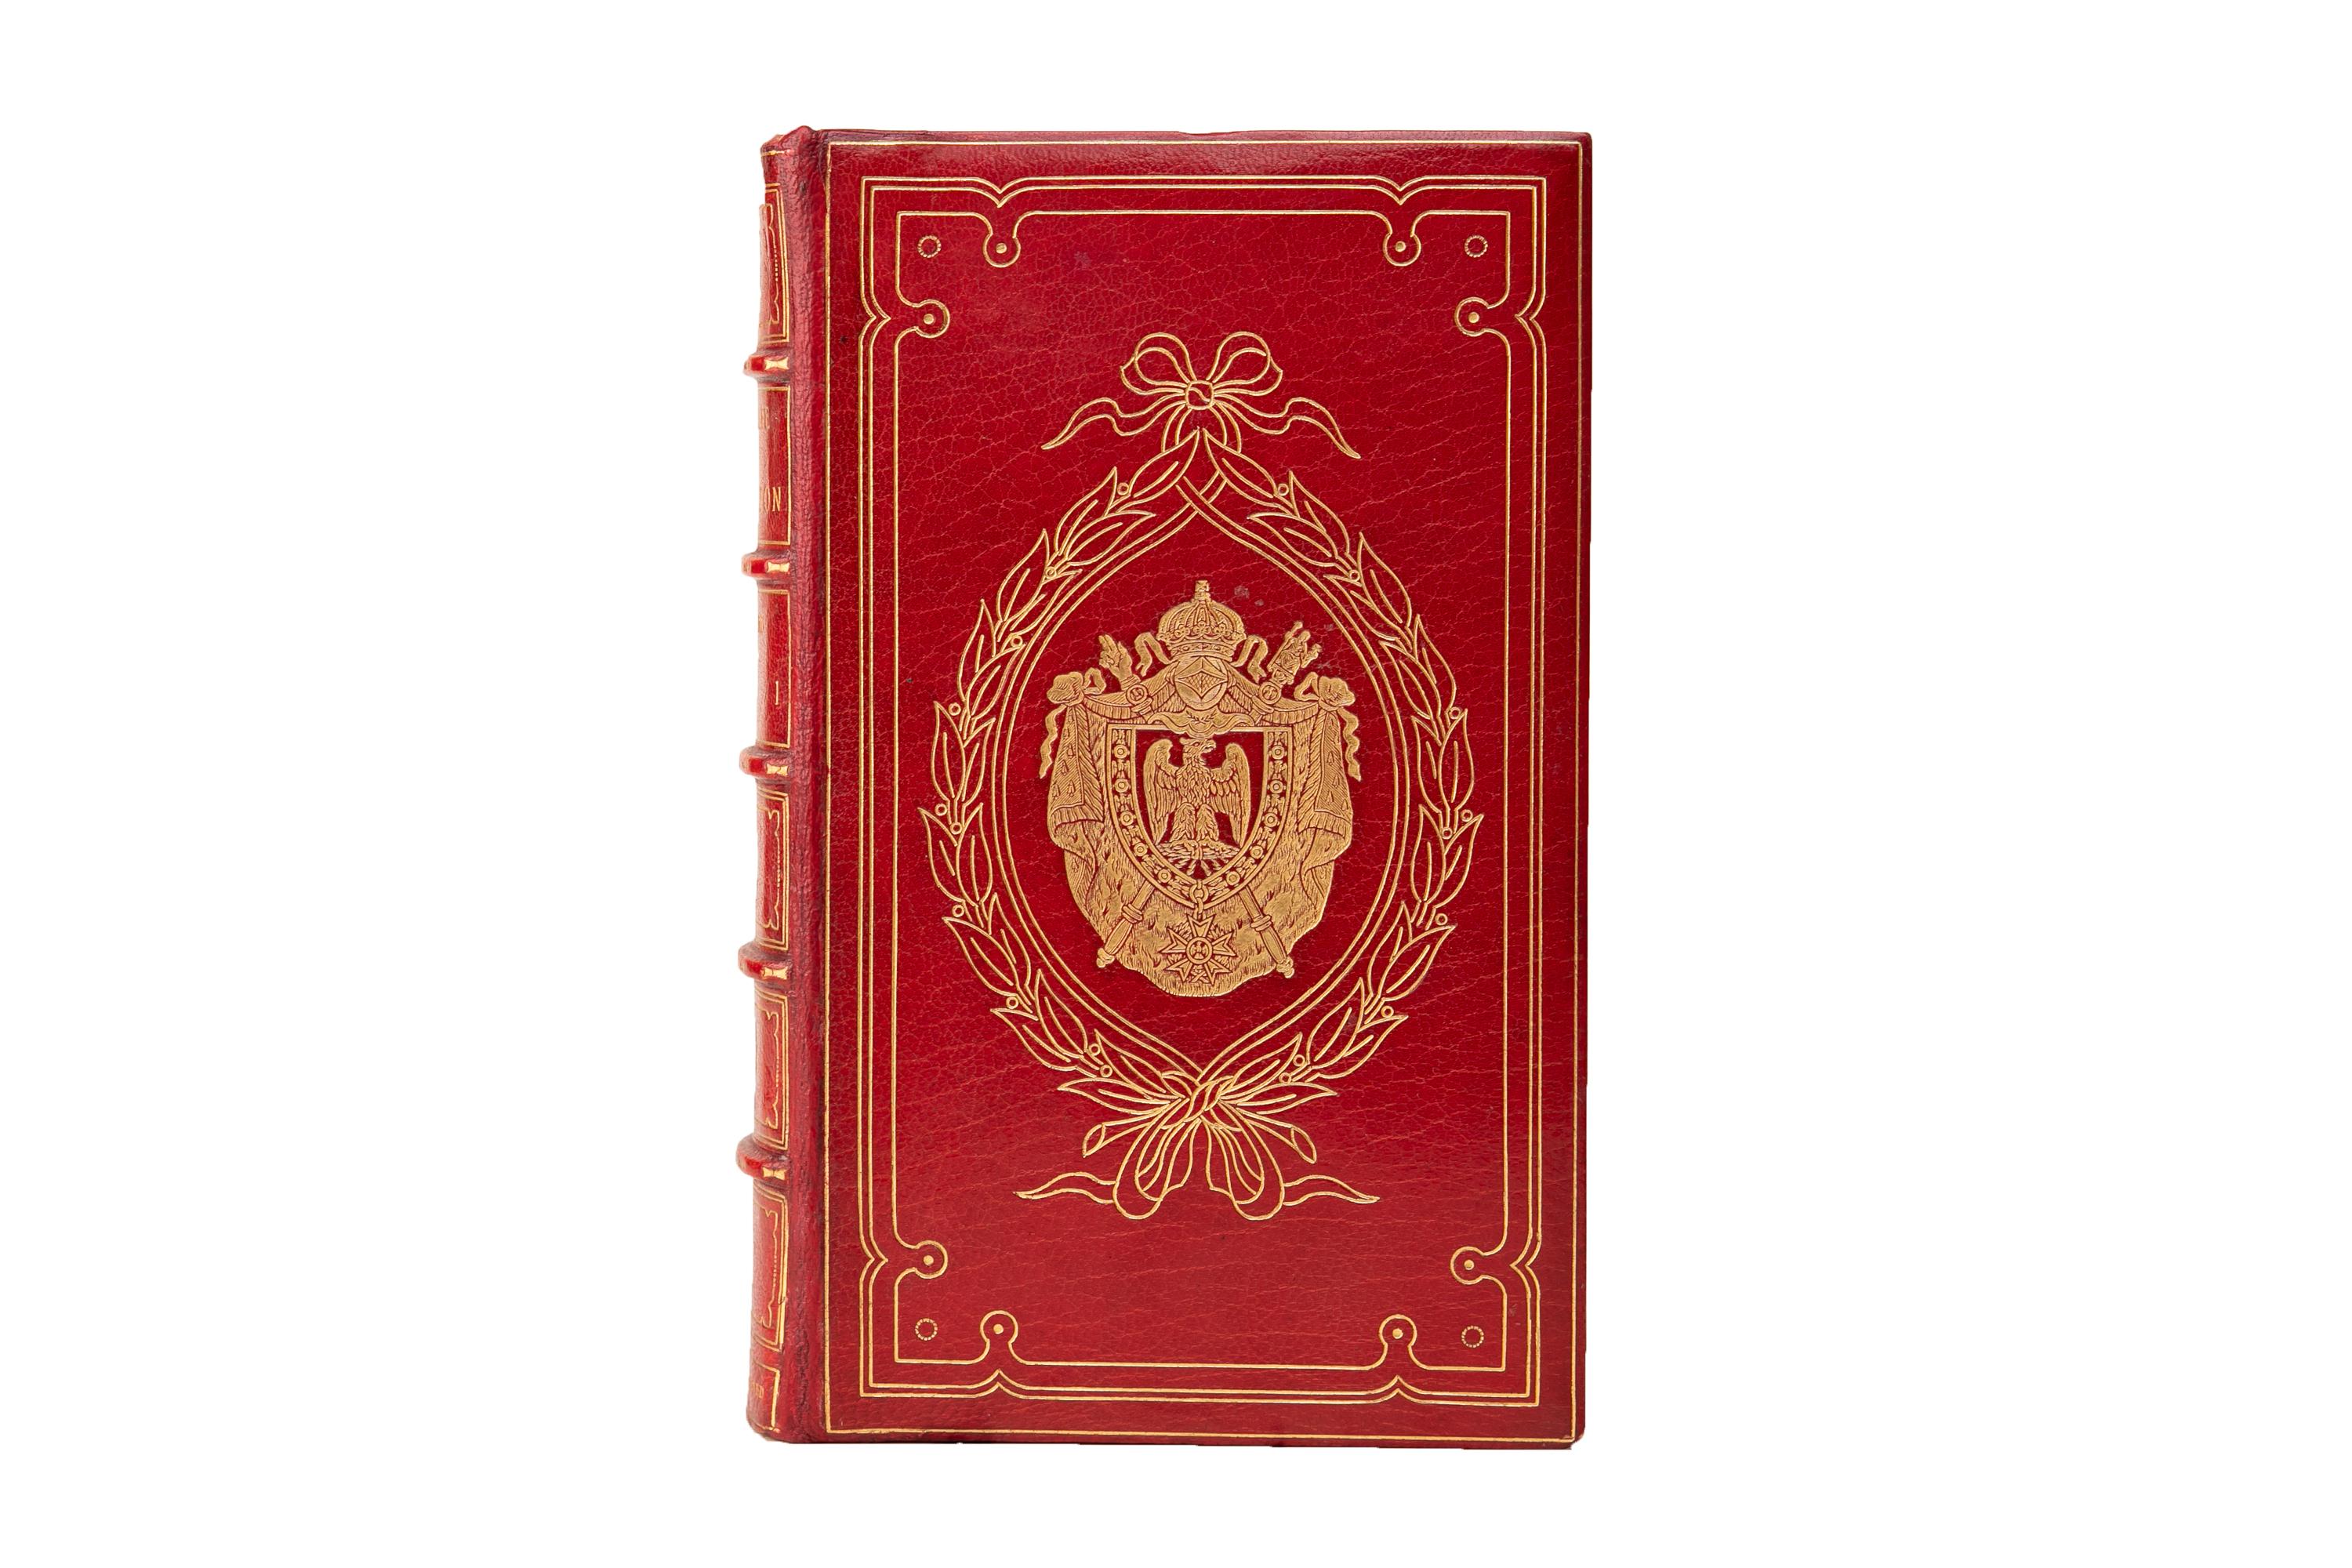 4 Volumes. W.H. Ireland, Life of Napoleon Bonaparte. Bound by Bayntun in full red morocco with the covers and raised band spines decorated in ornate gilt-tooling. All of the edges are gilt with ornate cosway-style portraits behind glass, black and